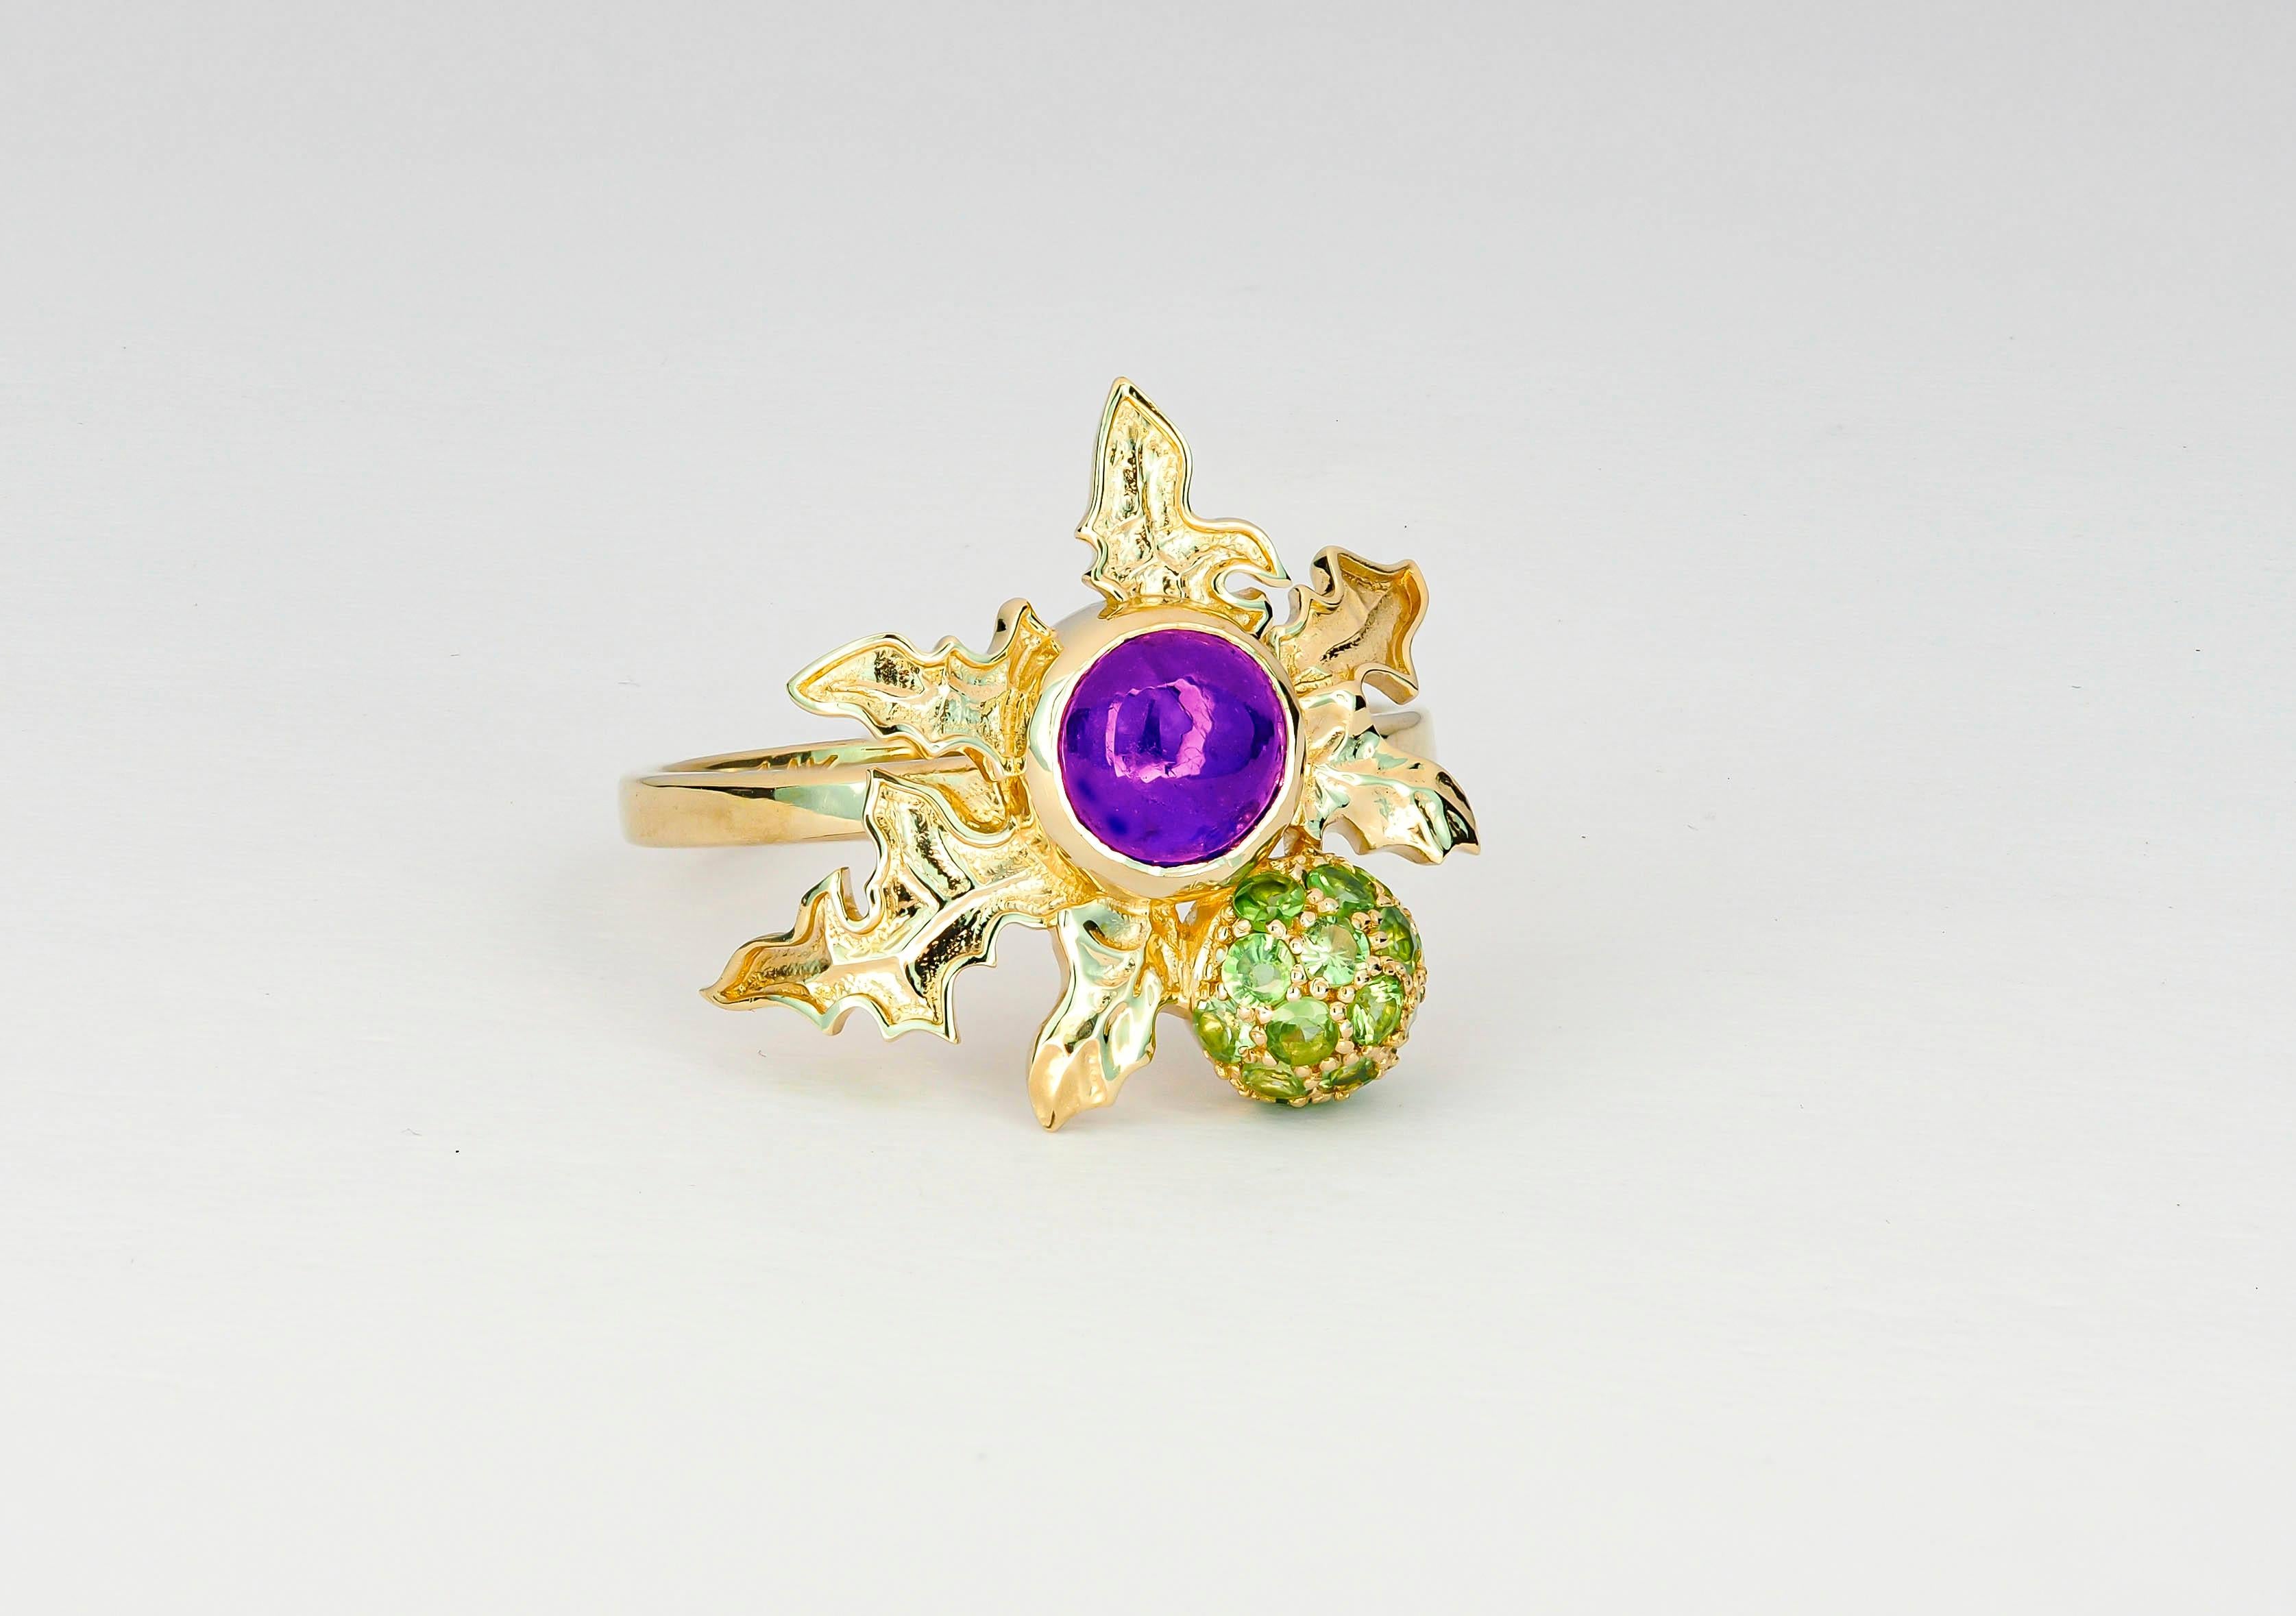 For Sale:  14 K Gold Scottish Thistle Ring with Amethyst and Peridots! 6